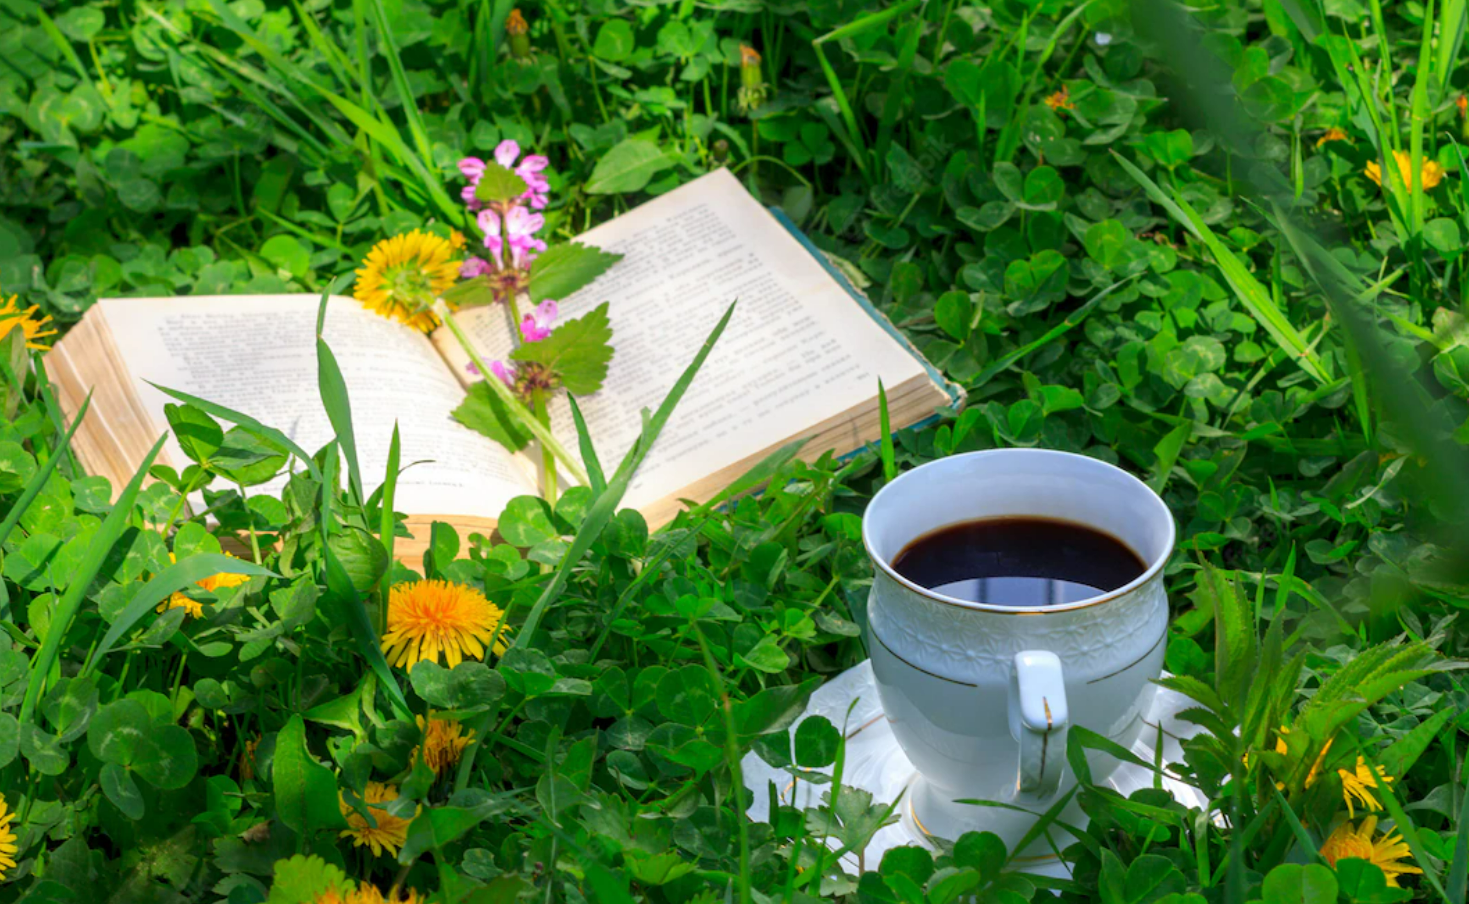 Cup of coffee with a book in a field of dandylions